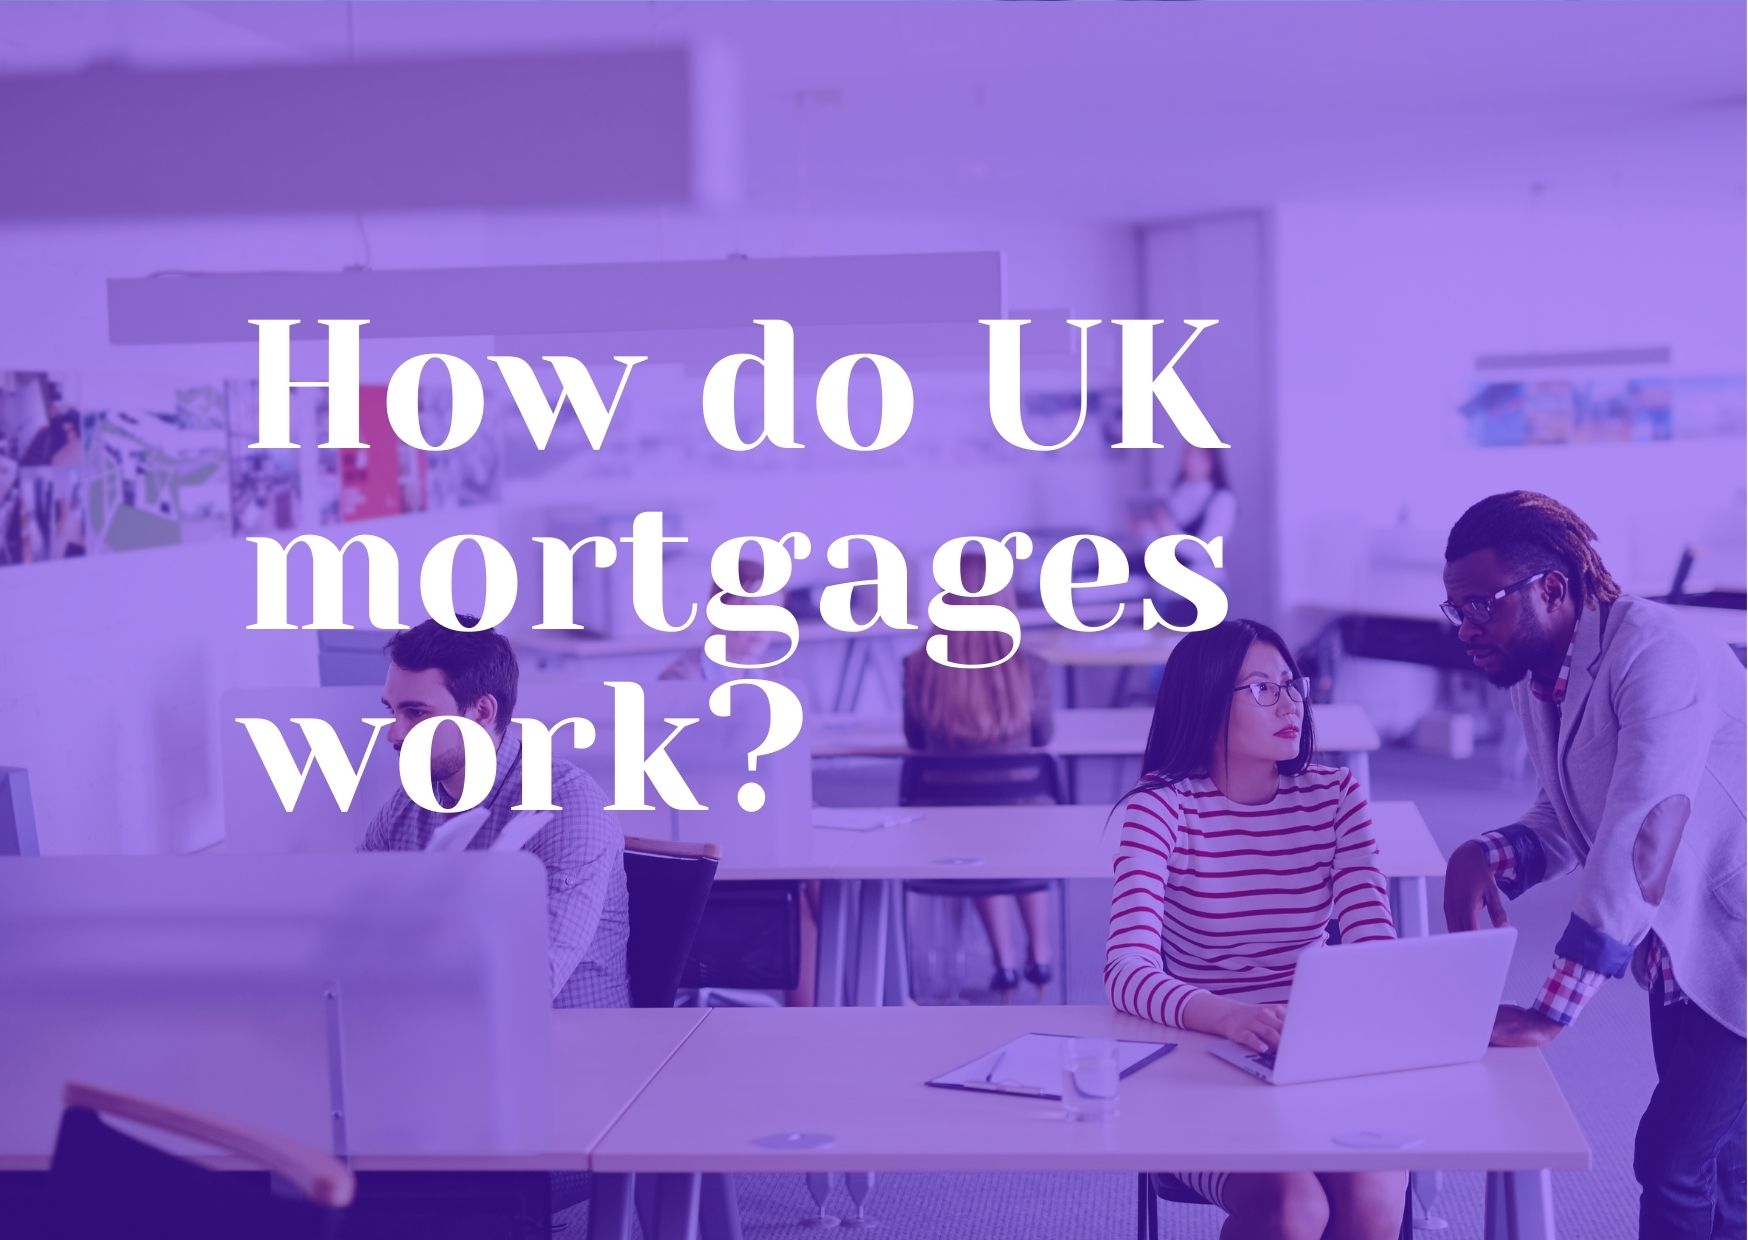 How do UK mortgages work?